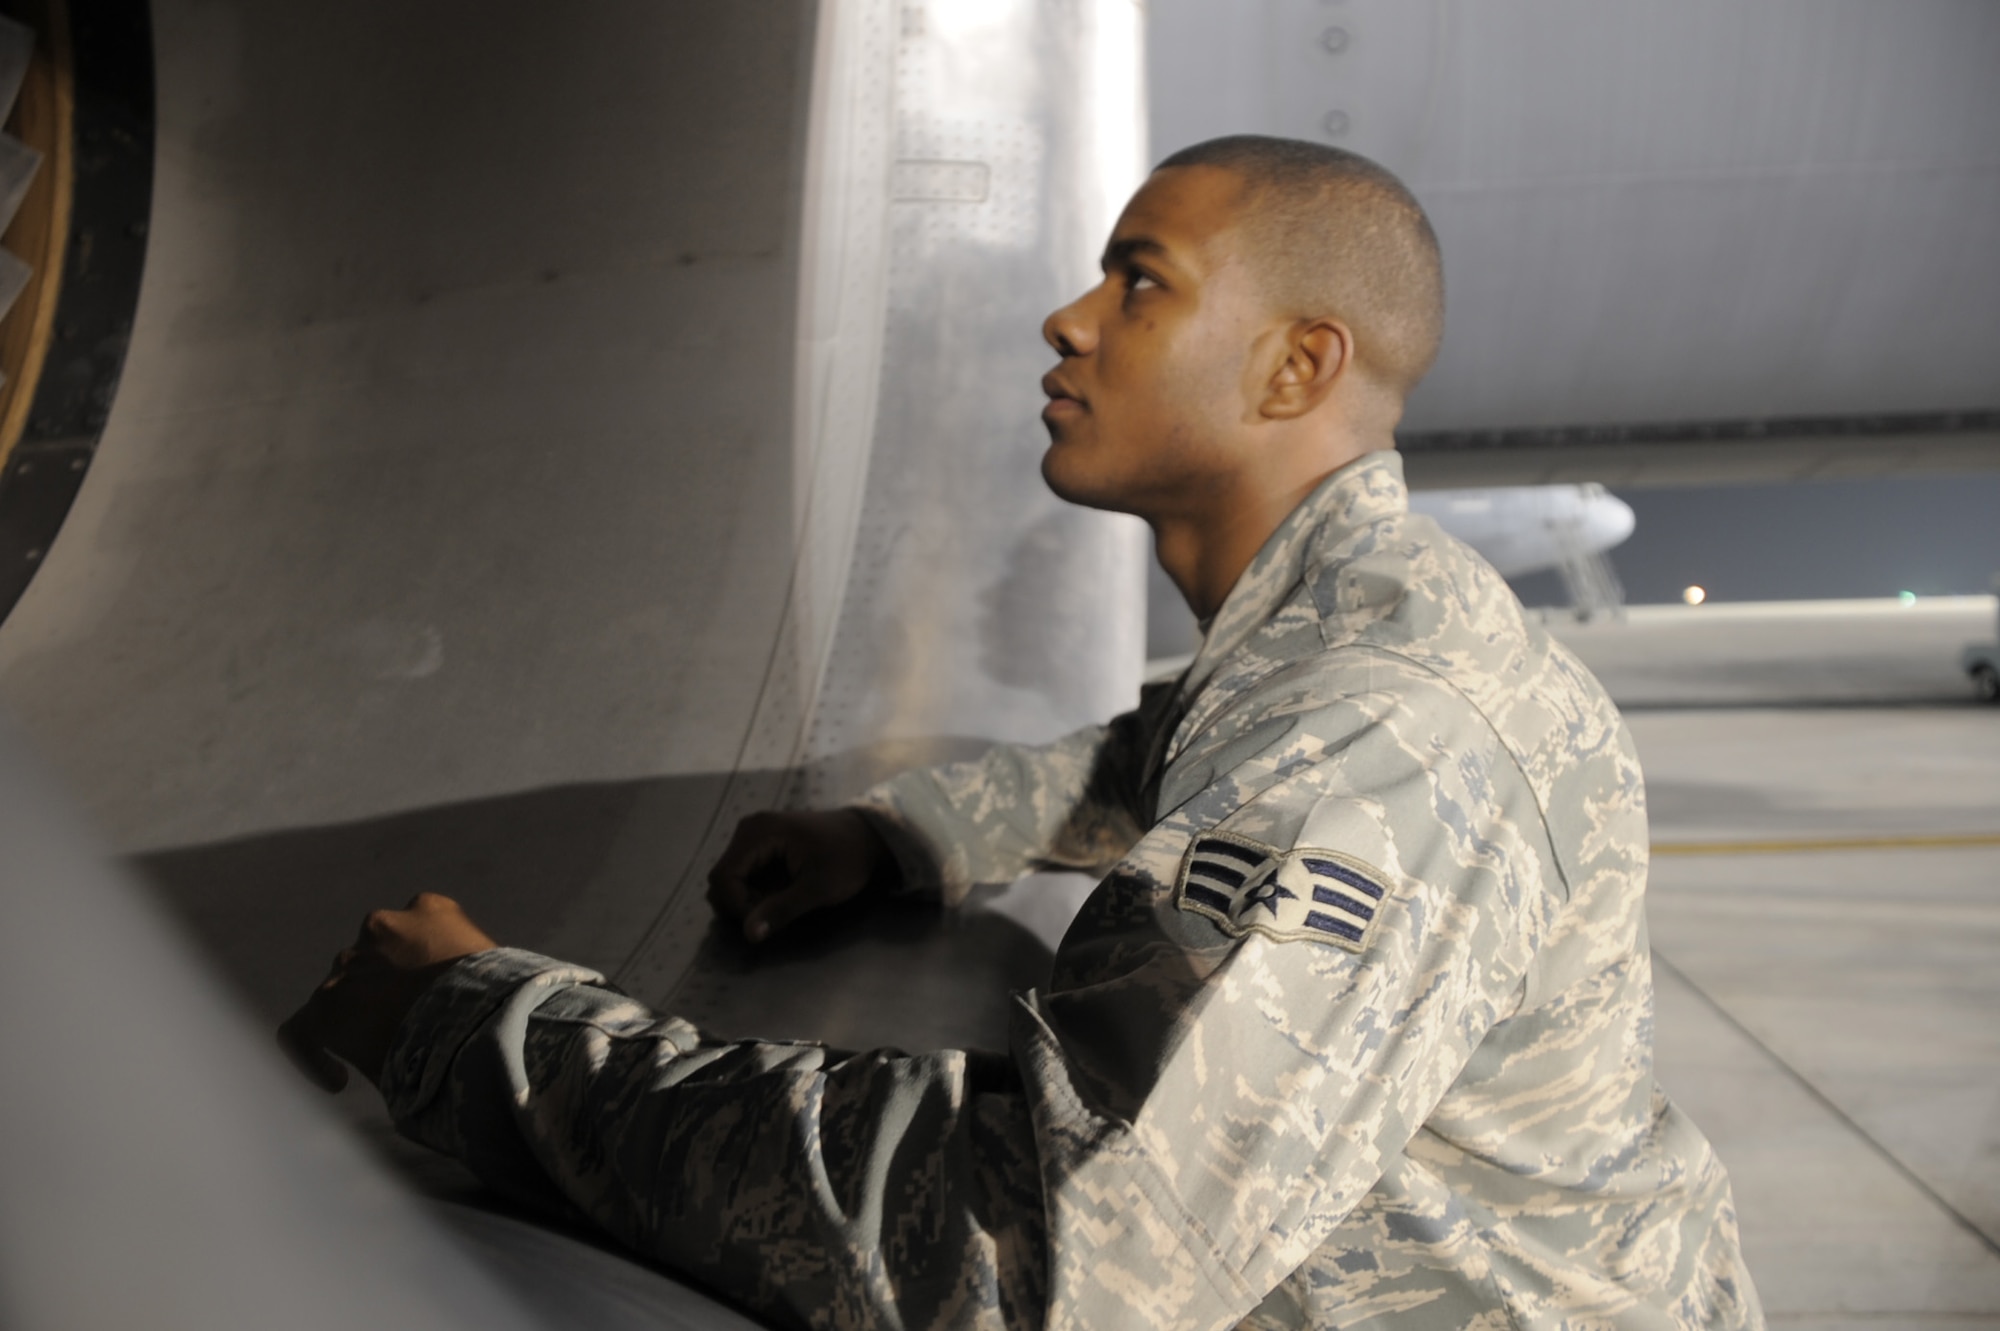 Senior Airman Justin Lassiter, KC-10 Extender aerospace propulsion journeyman deployed with the 380th Expeditionary Aircraft Maintenance Squadron, looks over the engine of a KC-10 at a non-disclosed base in Southwest Asia. His primary mission is to fix and maintain KC-10 aircraft engines and systems. He is on his third deployment with the 380th EAMXS. Airman Lassiter is deployed from the 605th Aircraft Maintenance Squadron at Joint Base McGuire-Dix-Lakehurst, N.J., and his hometown is Wilson, N.C. (U.S. Air Force Photo/Master Sgt. Scott T. Sturkol/Released)